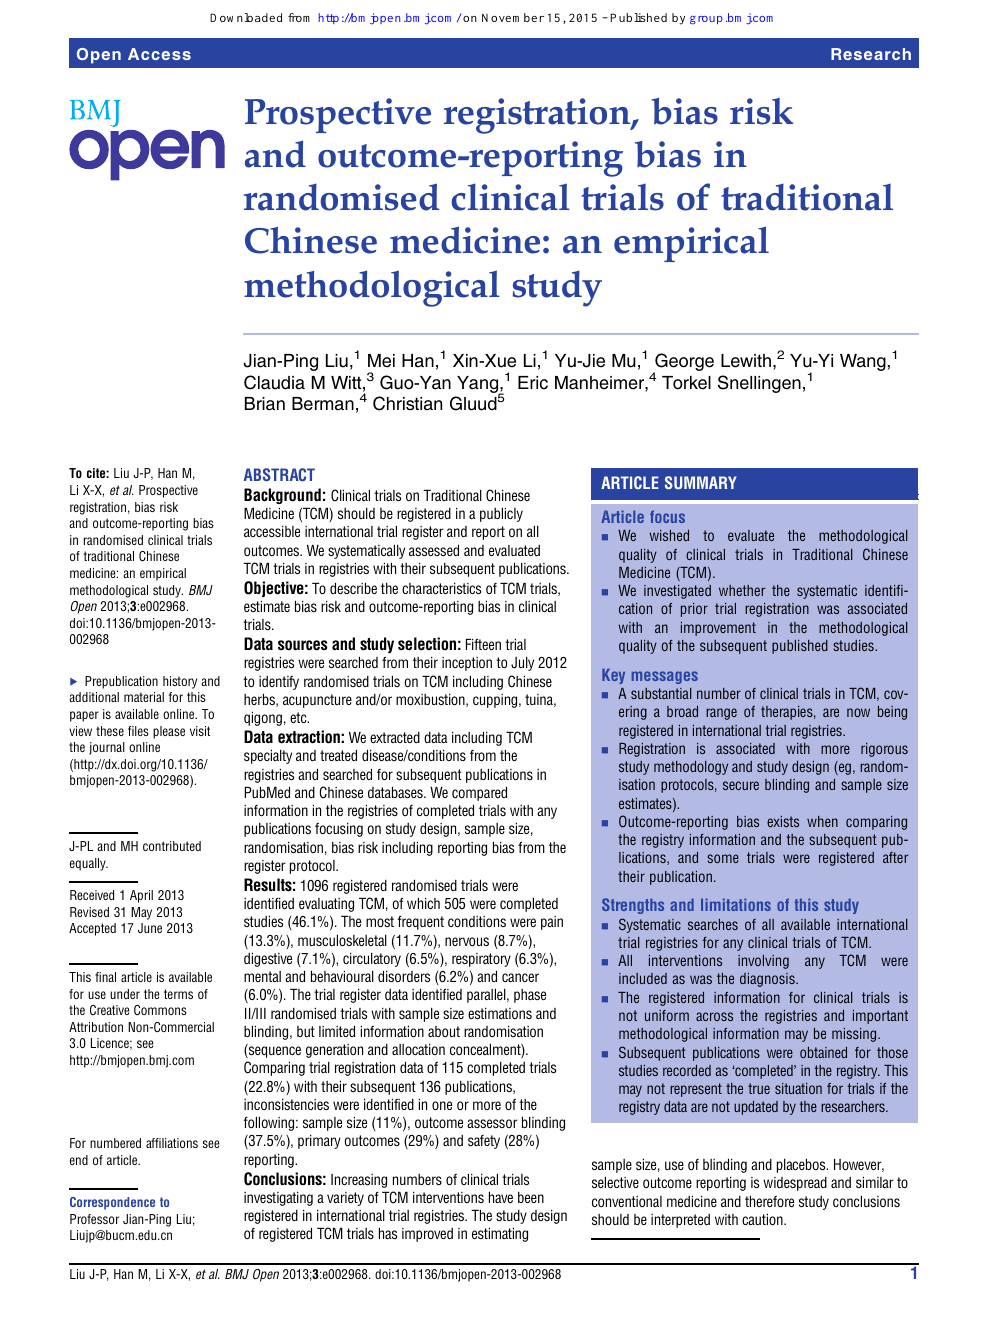 Prospective Registration Bias Risk And Outcome Reporting Bias In Randomised Clinical Trials Of Traditional Chinese Medicine An Empirical Methodological Study Topic Of Research Paper In Health Sciences Download Scholarly Article Pdf And